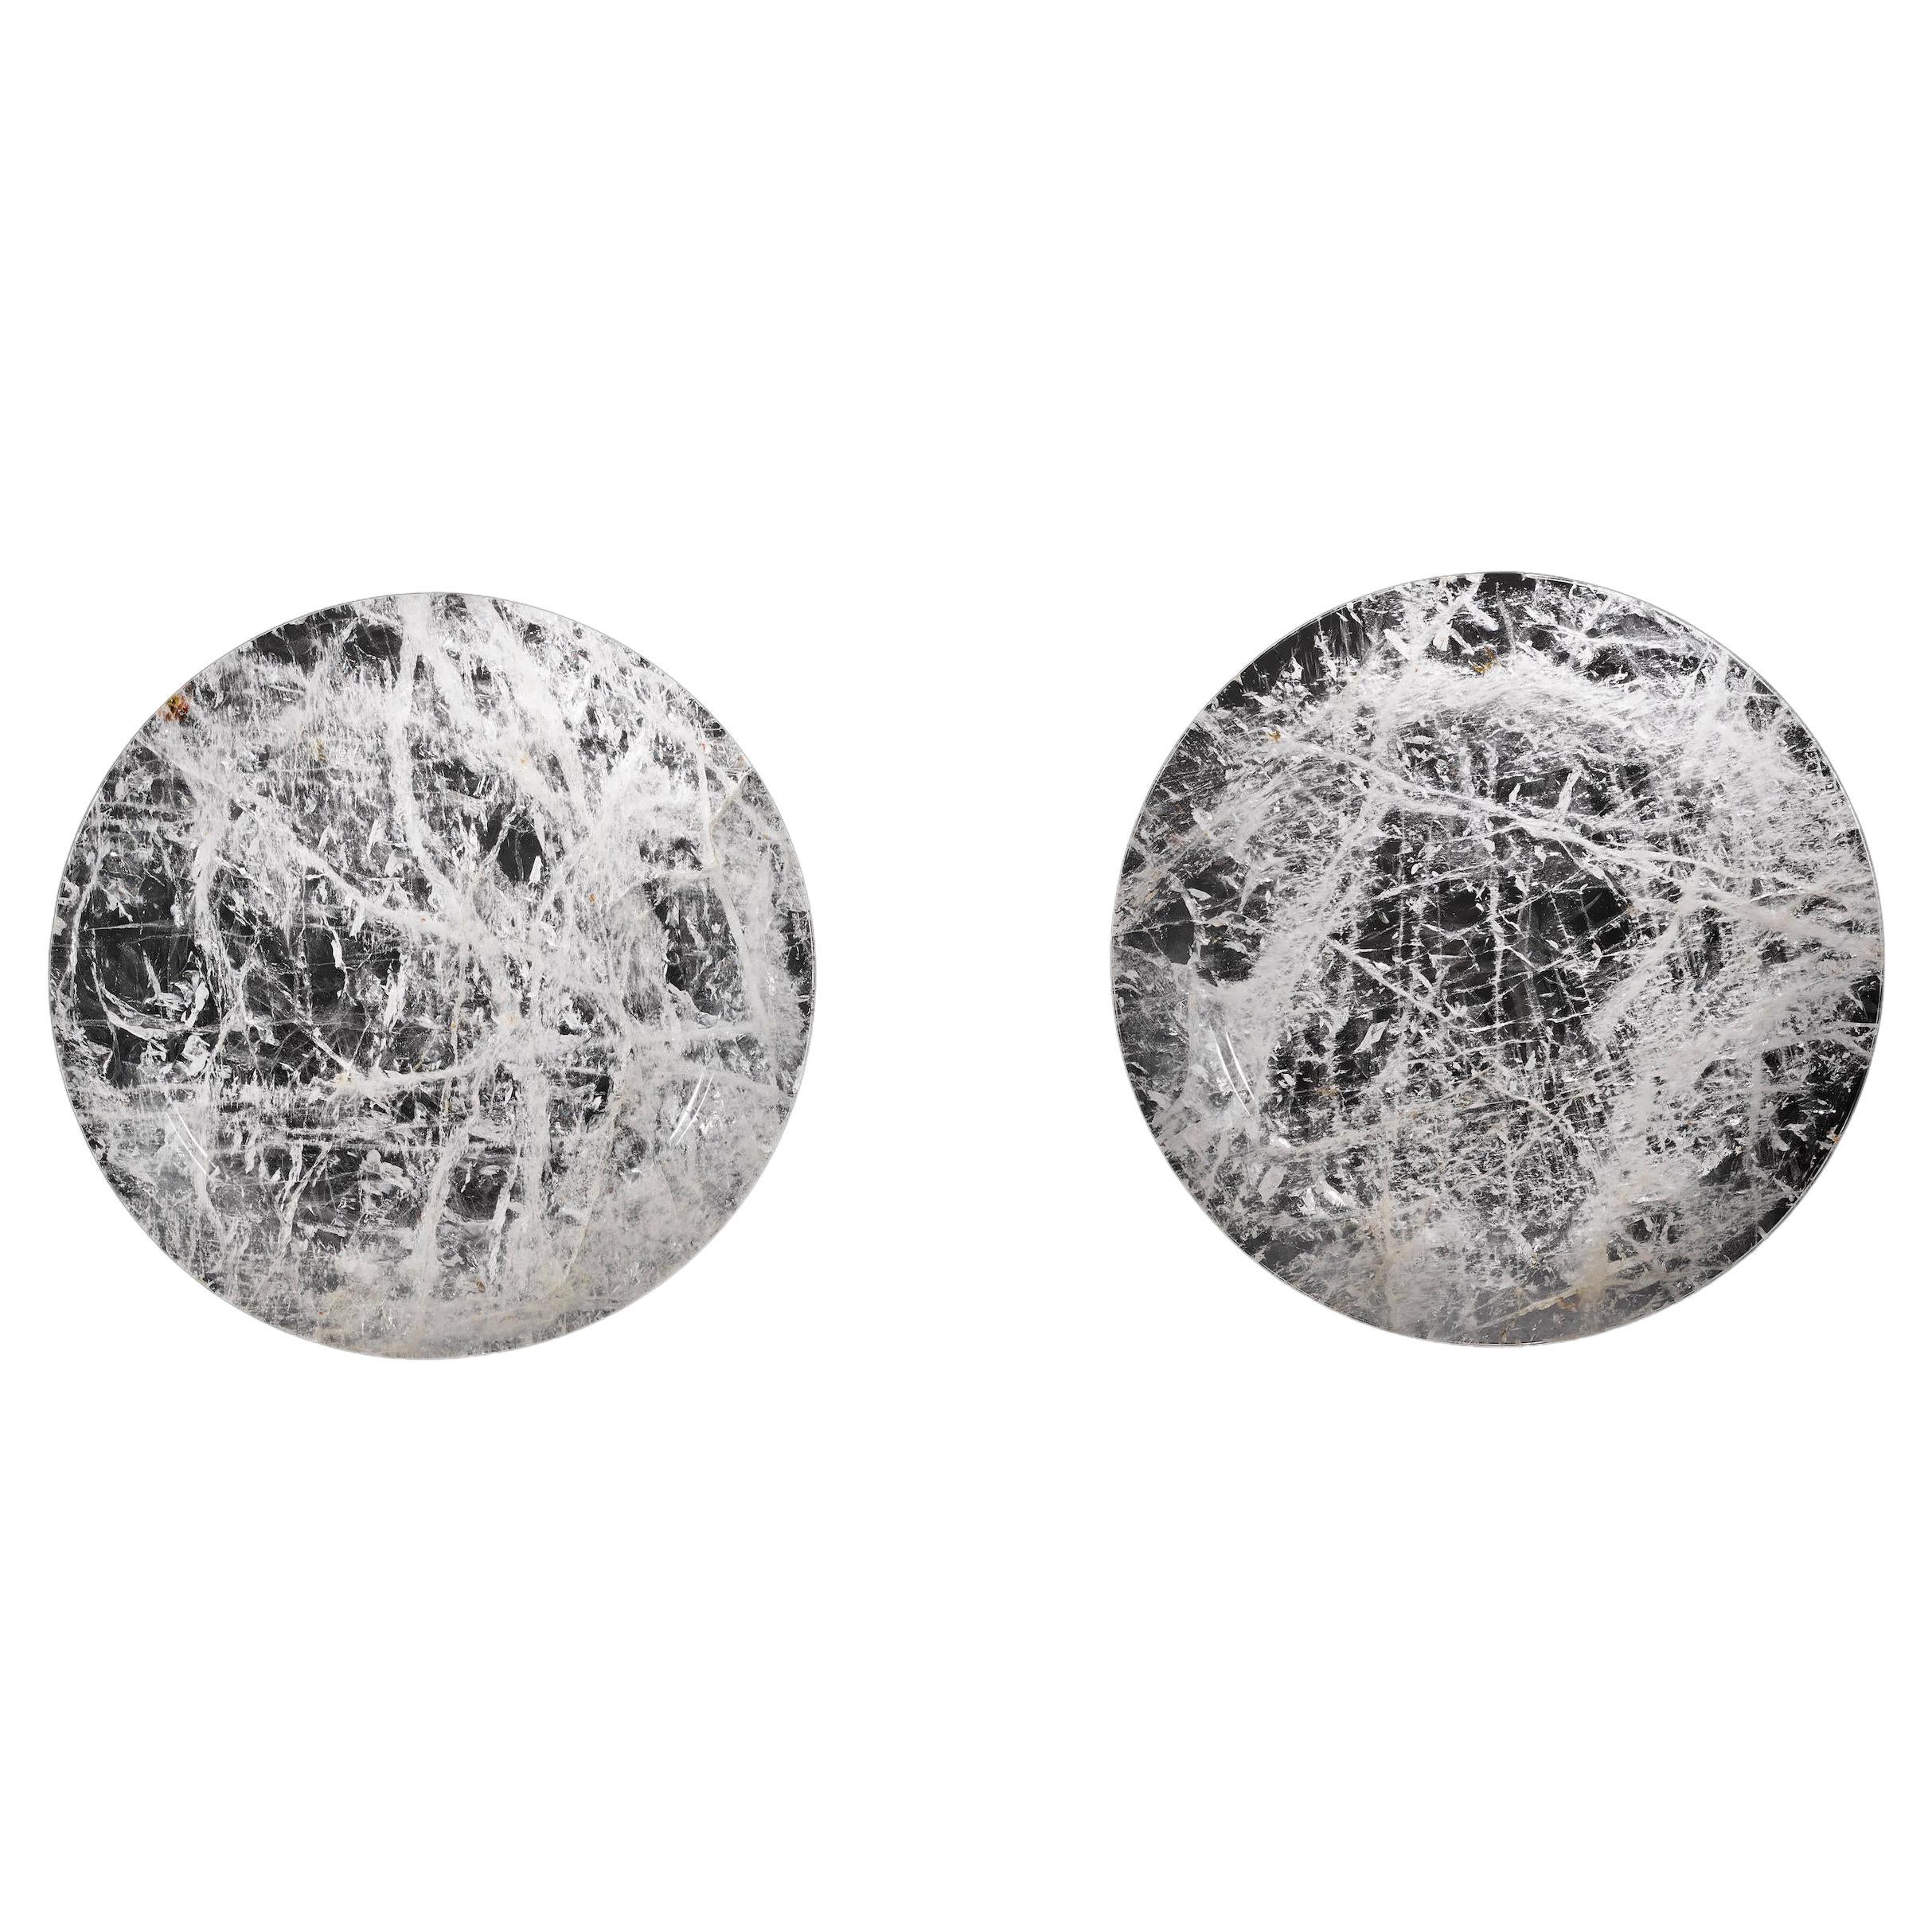 Elaborate transparent rock crystal quartz, with good transparency to form a highly decorative pair of ornamental plates (chargers) of very large diameter. The amount of rough which is wasted when carving such items is tremendous.
Diameter 15 1/2